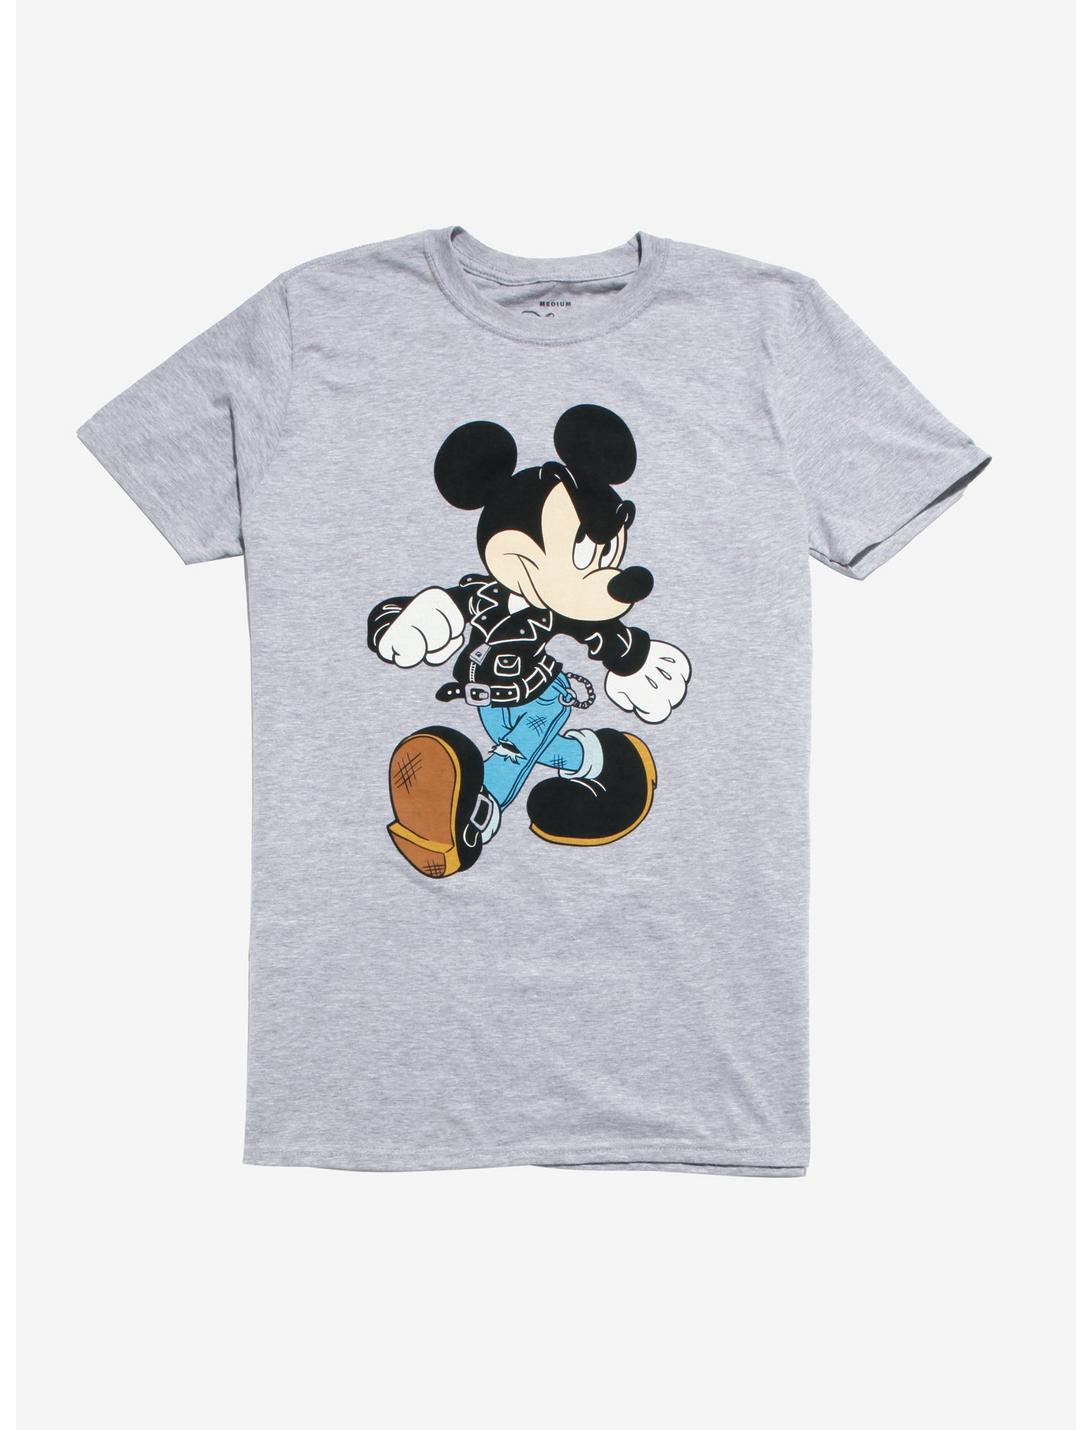 Disney Mickey Mouse Greaser T-Shirt, MULTI, hi-res